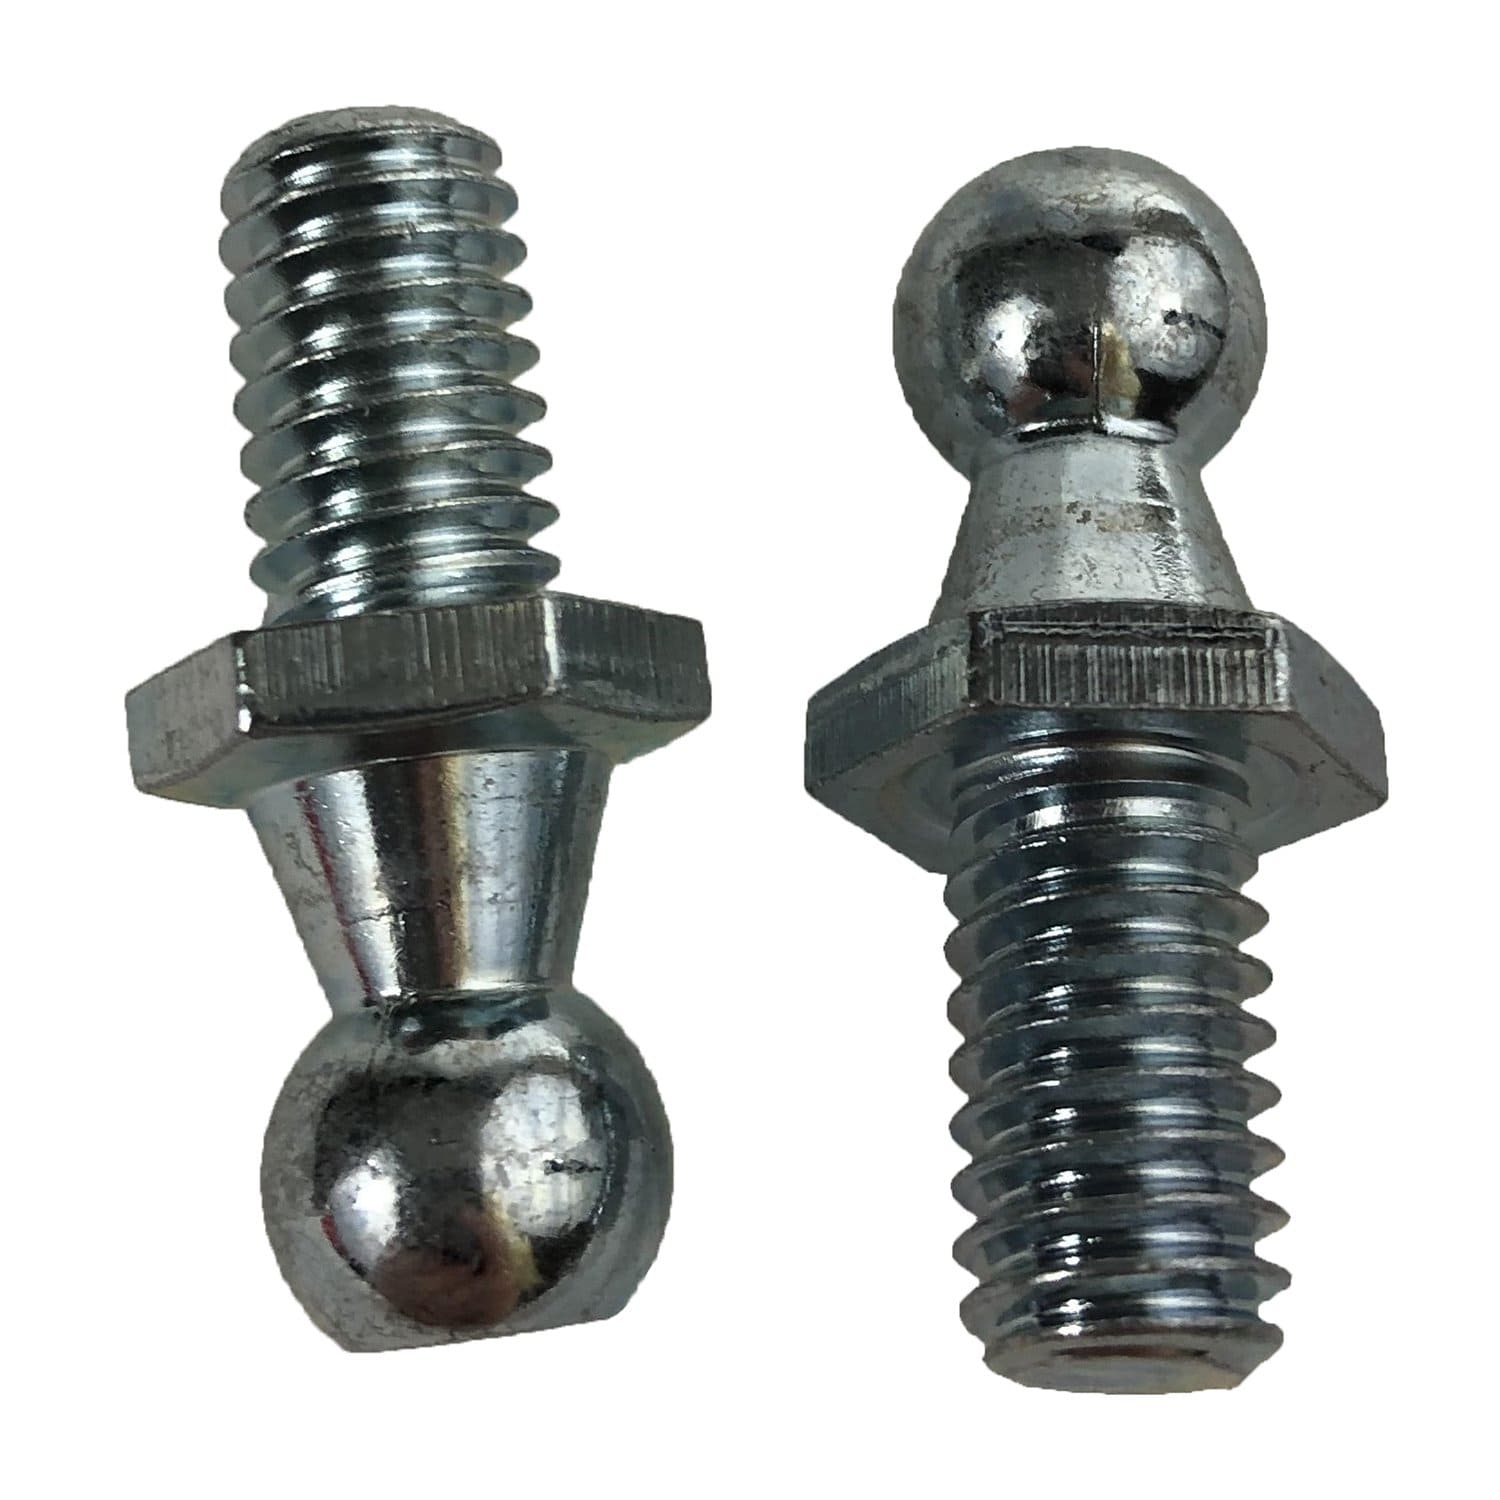 AP Products 010-080-2 Threaded Ball Stud, 5/8" x 16", 2 Pc